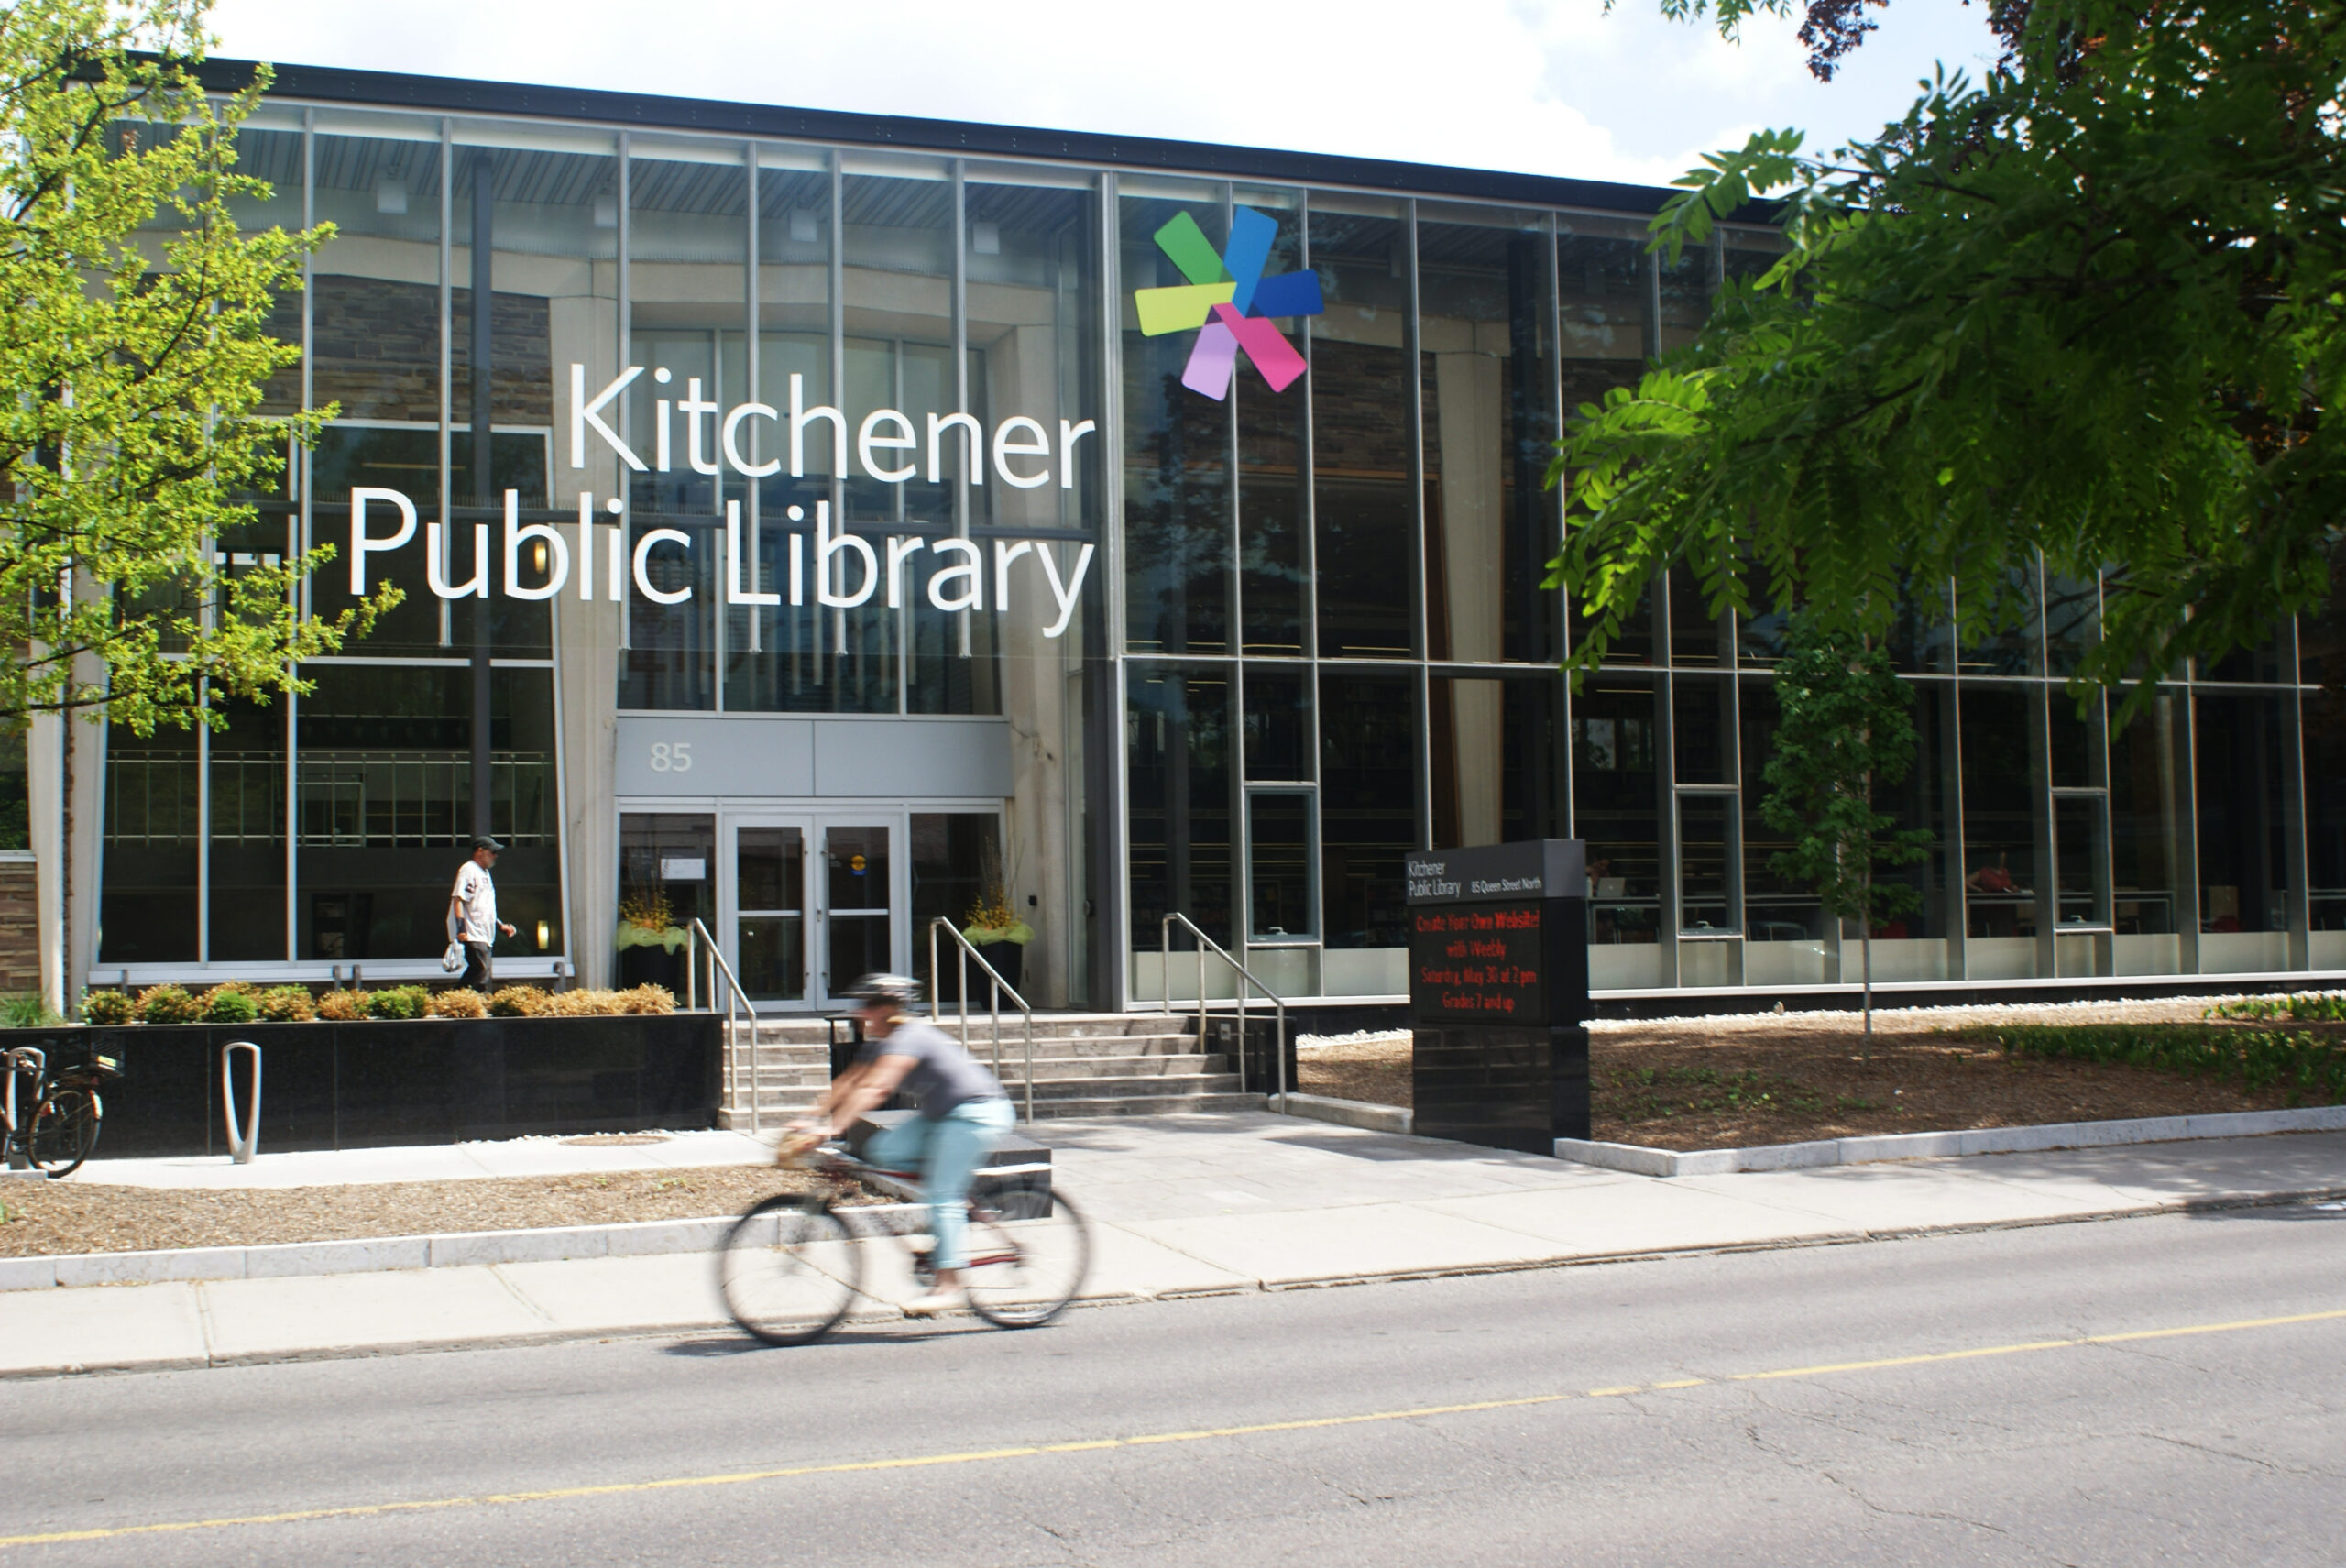 The front doors of the KPL Central Branch, whose front wall is entirely windows. A cyclist rides on the road in front.